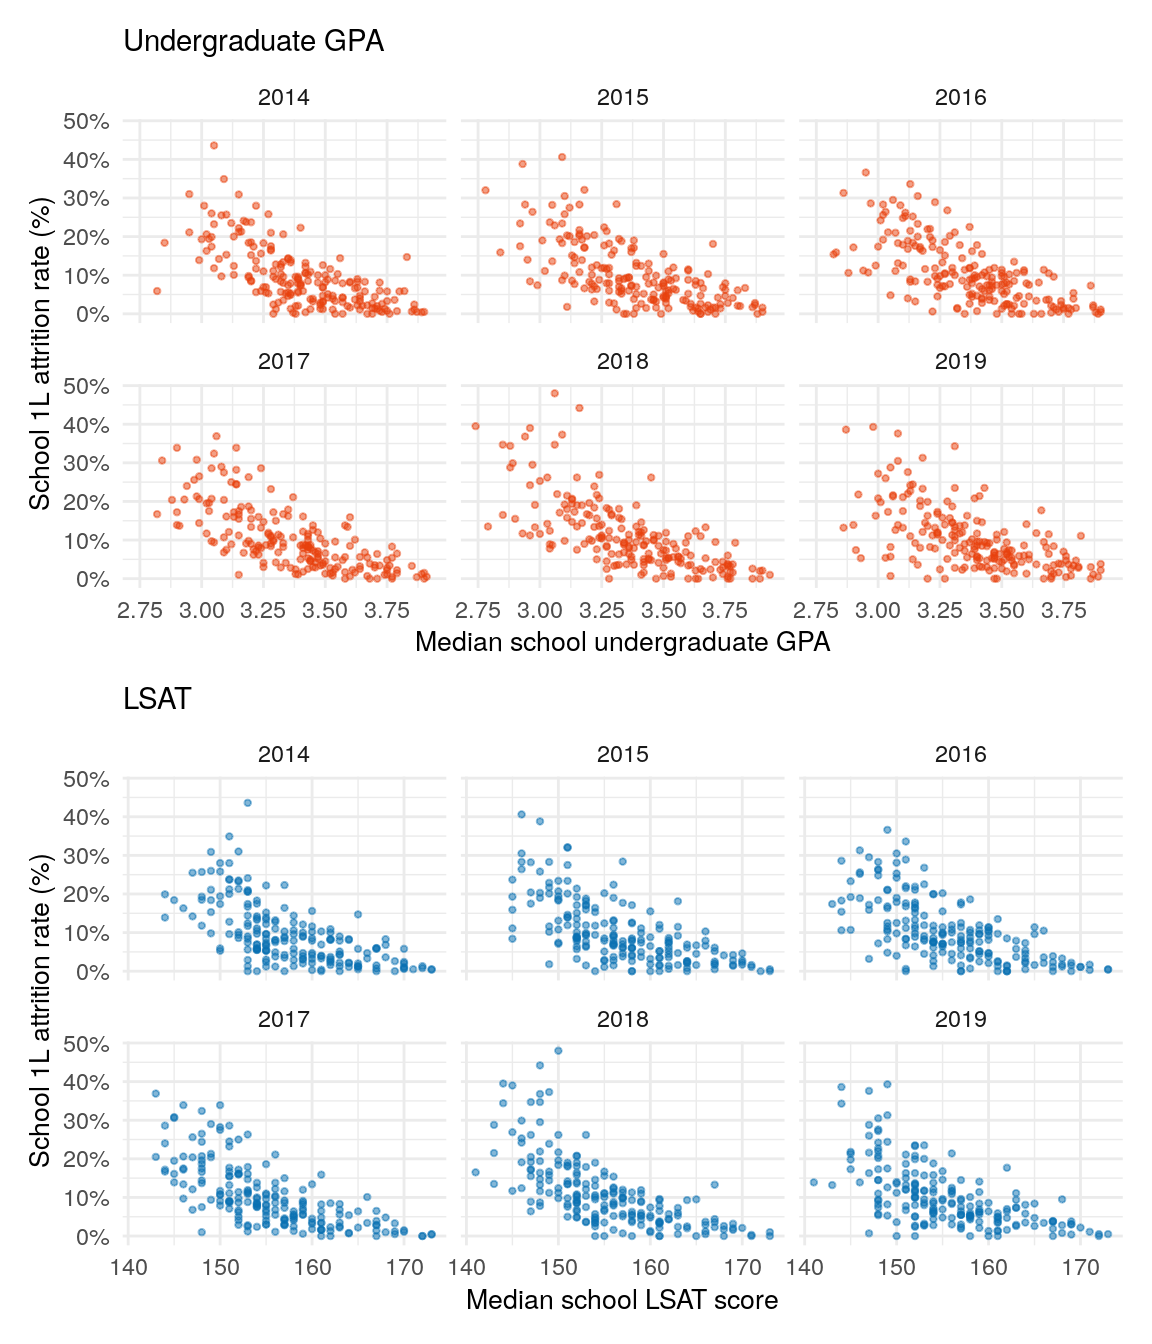 The top plot shows the relationship between a school's median undergrad GPA and 1L attrition. The bottom plot shows the relationship between median LSAT and 1L attrition. Both median undergrad GPA and median LSAT correlate slightly with 1L attrition.